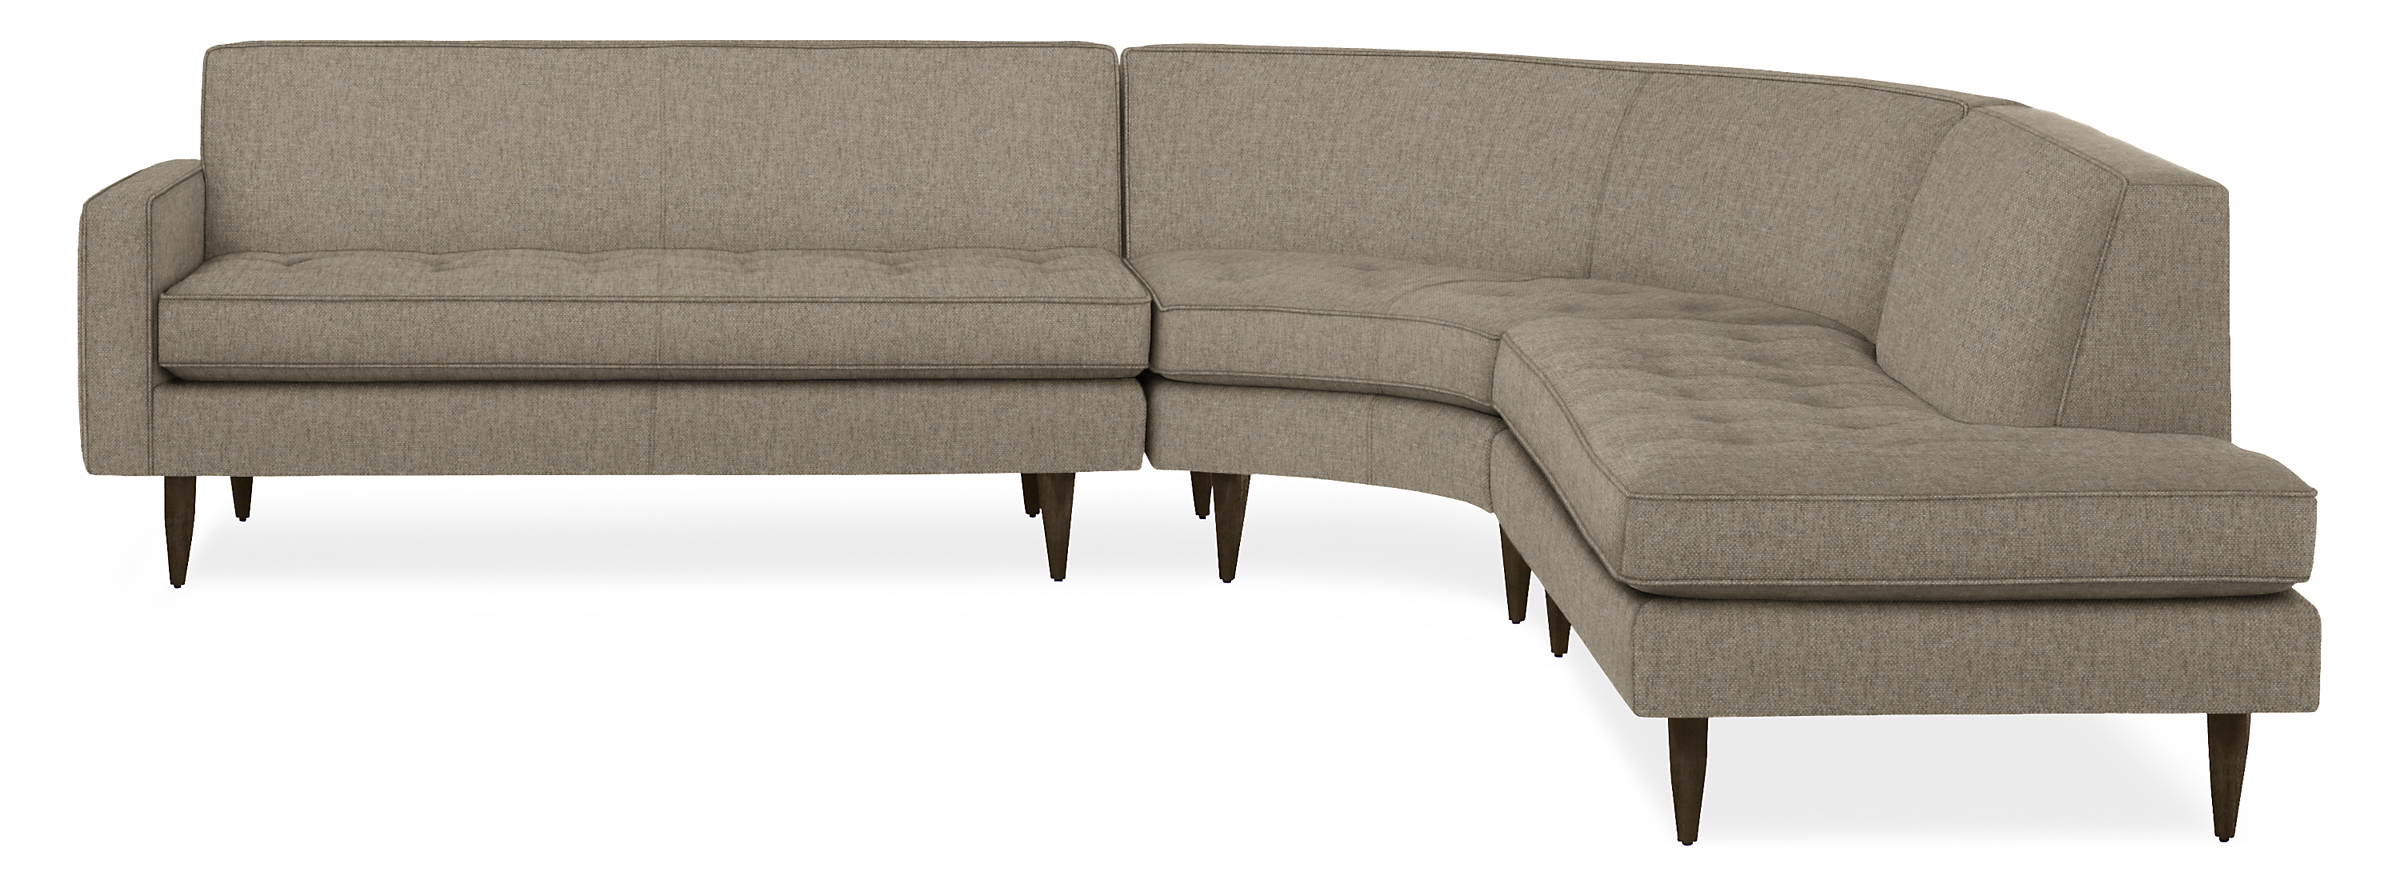 Reese 115x114" Three-Piece Curved Sectional w/Left-Back Sofa